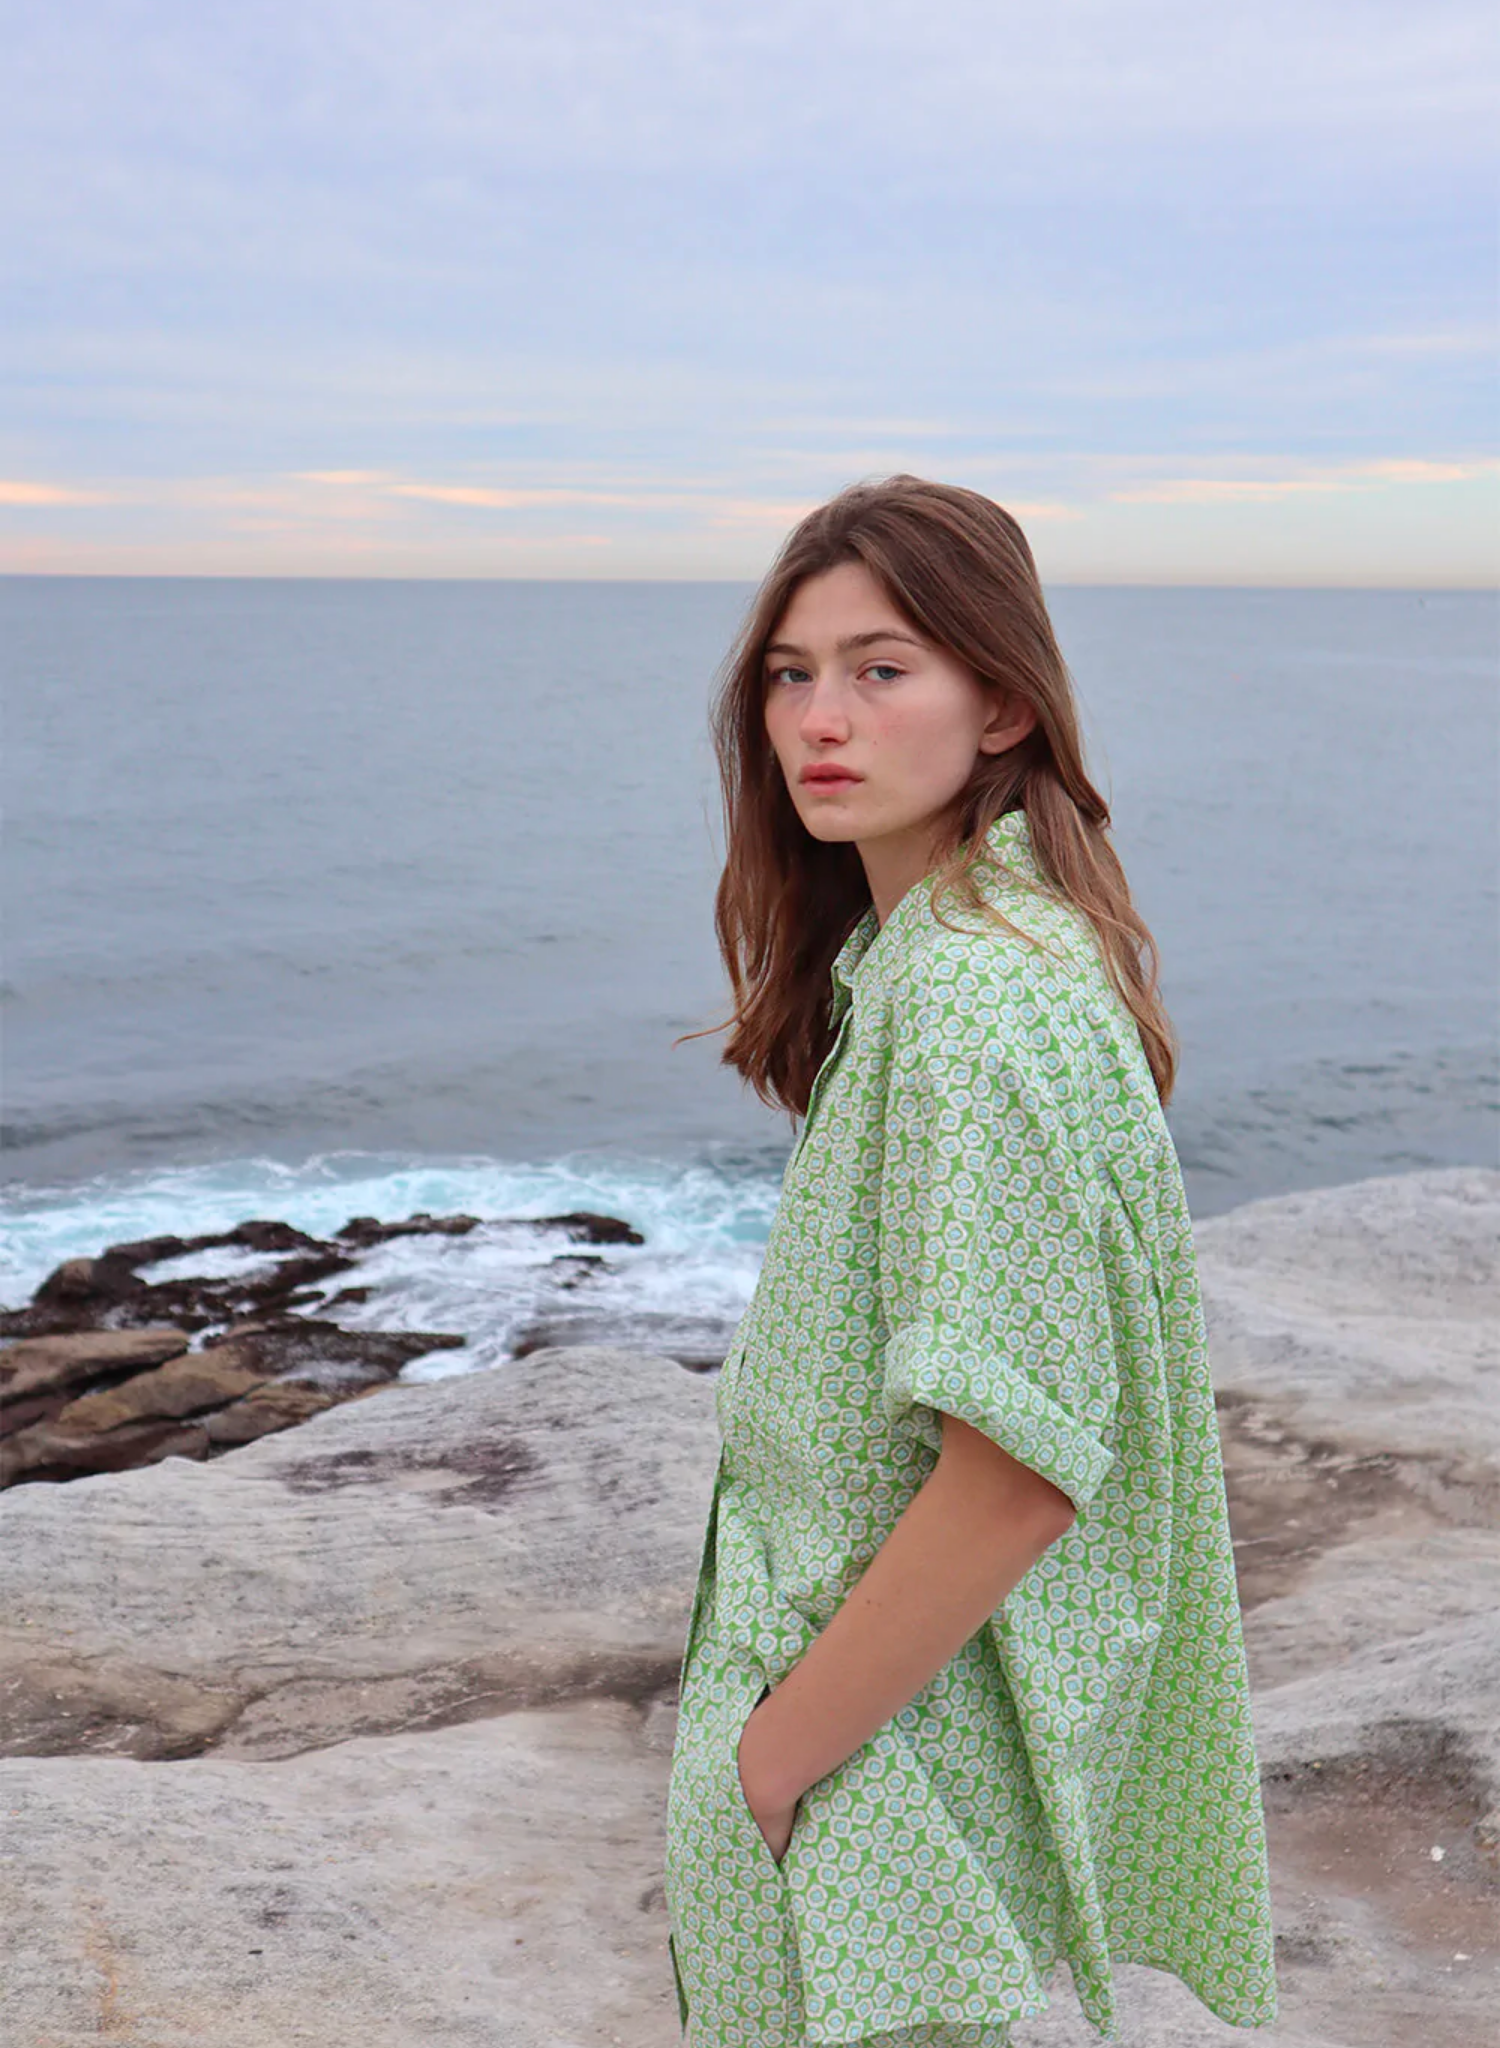 In a premium textural fabric, the Lola features classic button-up details and a soft green and white print. The style is cut with our signature oversized fit and features relaxed sleeves.